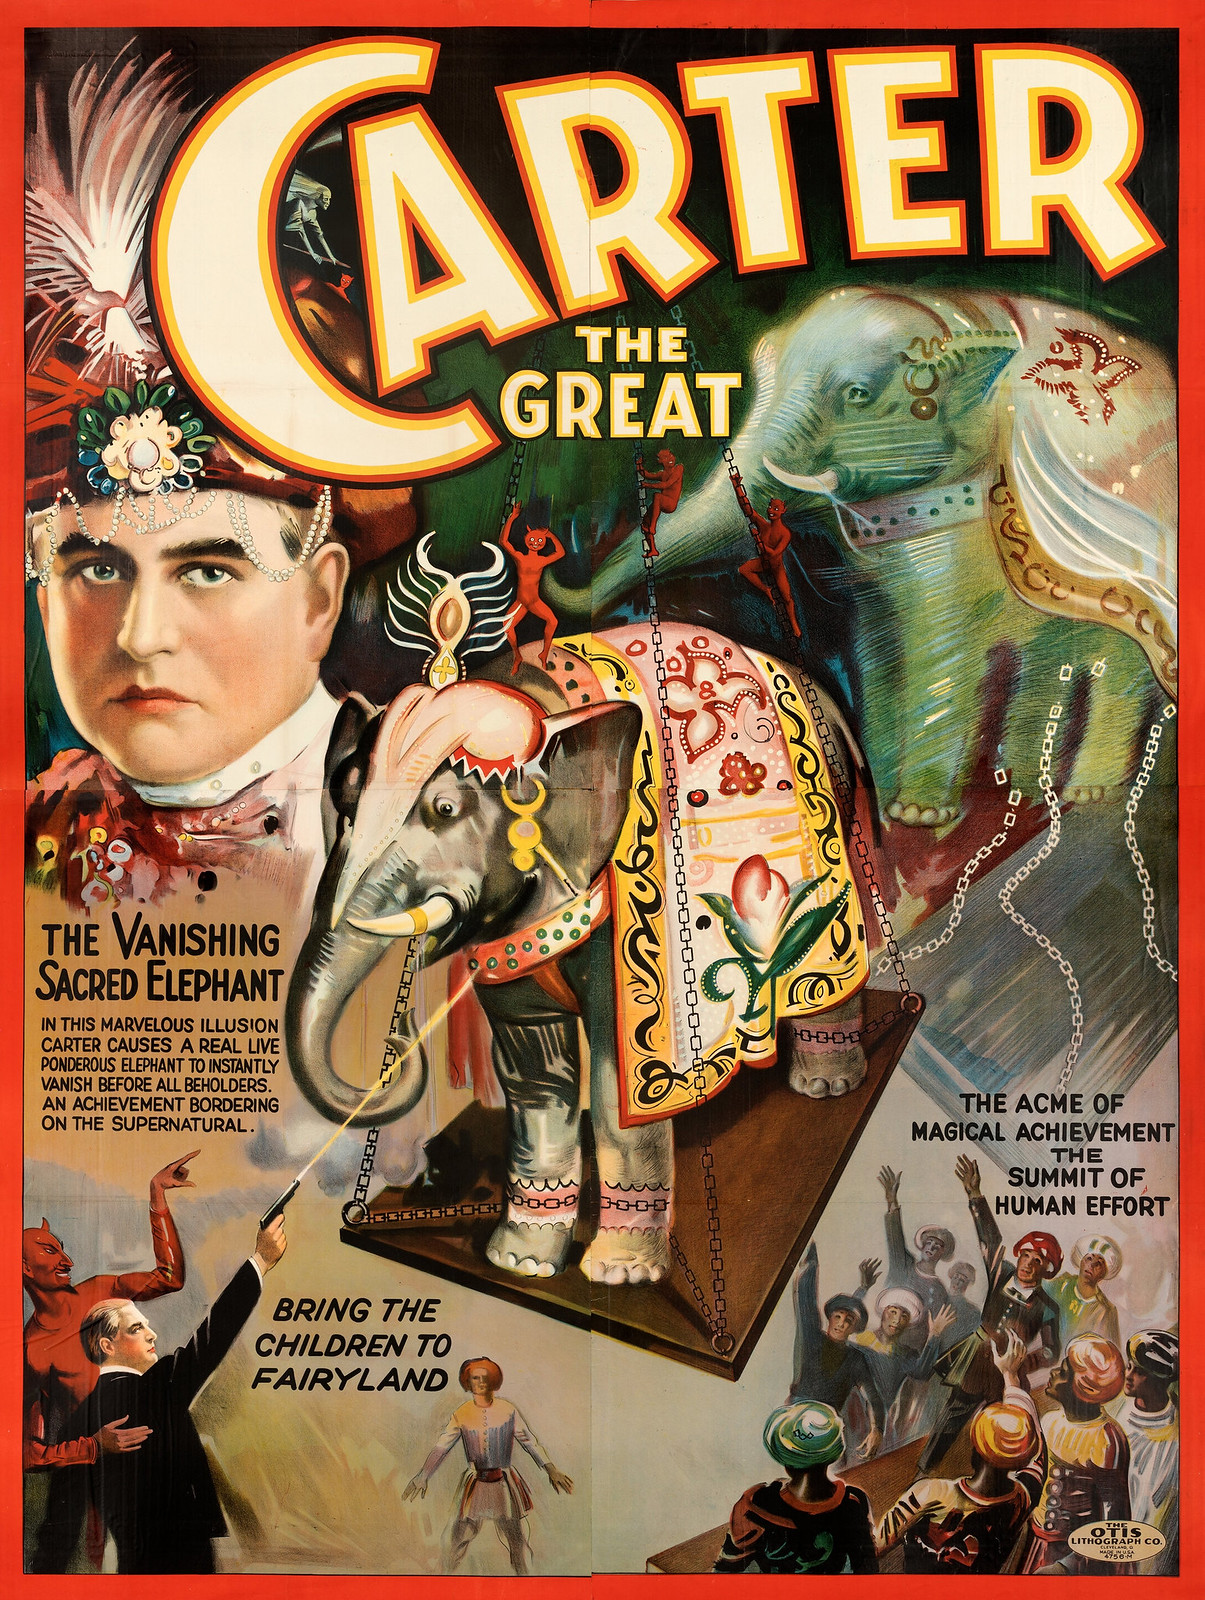 Carter the Great (c.1927)